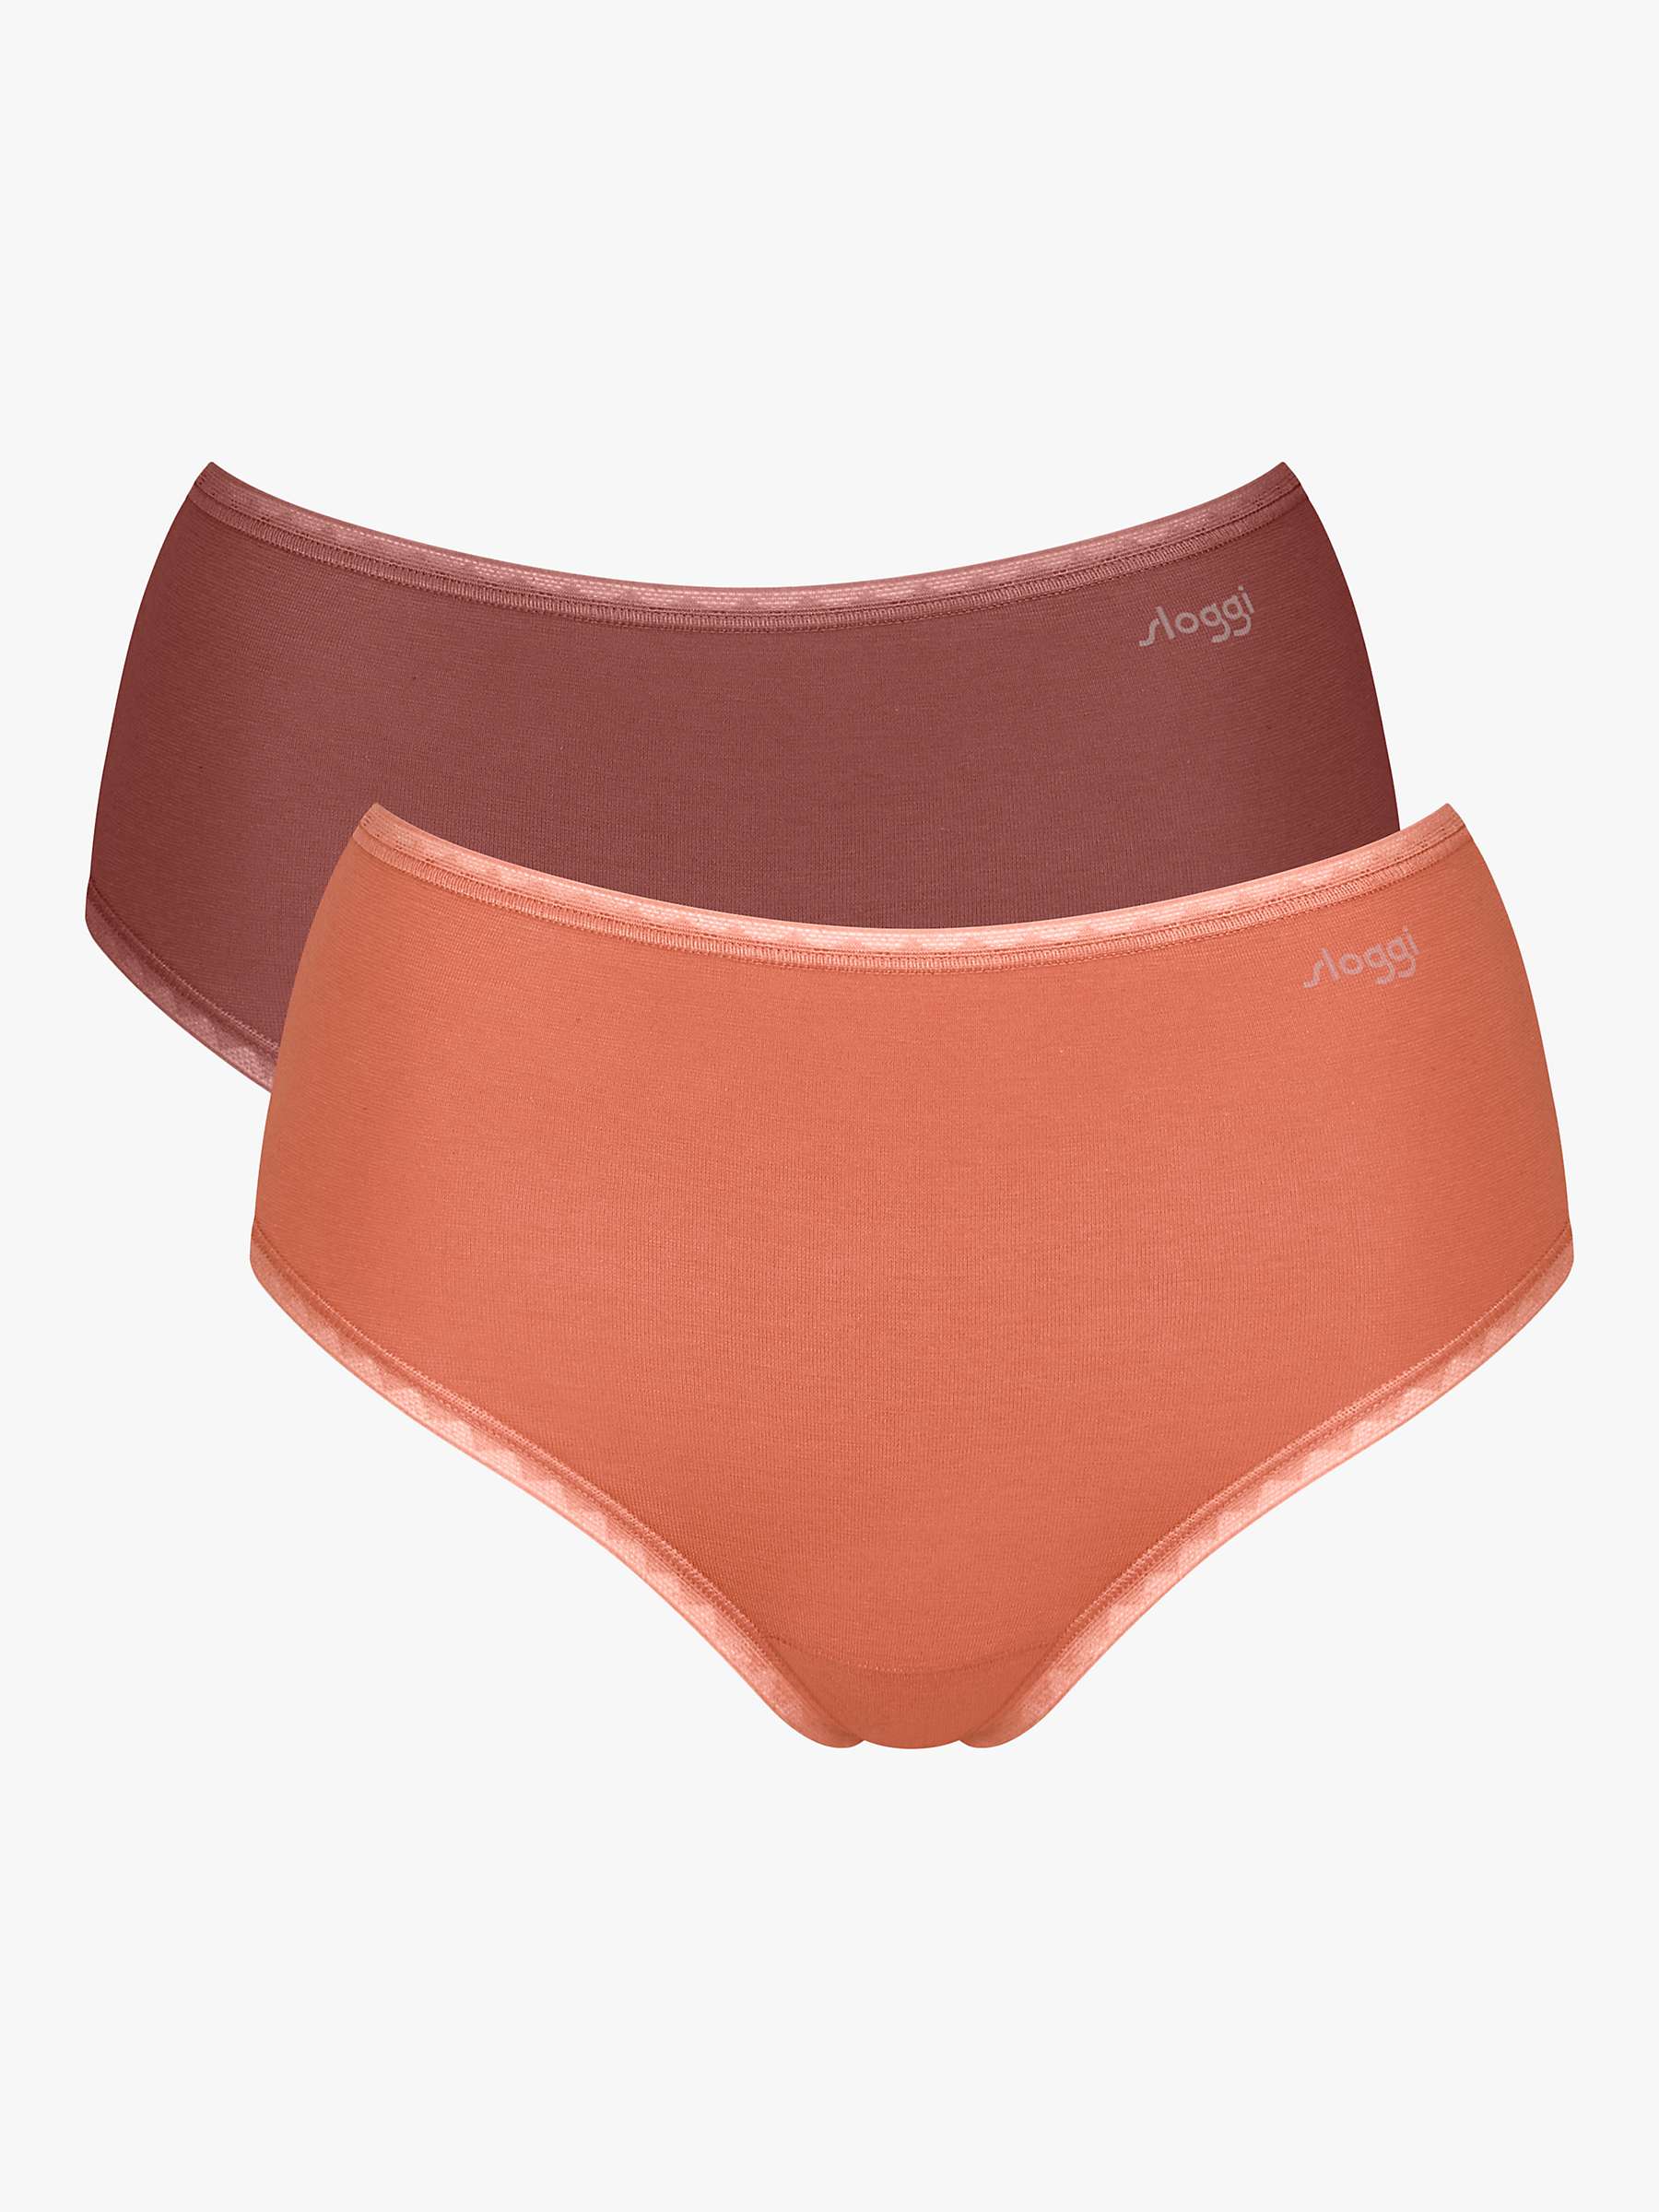 Buy sloggi GO High Waist Knickers, Pack of 2 Online at johnlewis.com